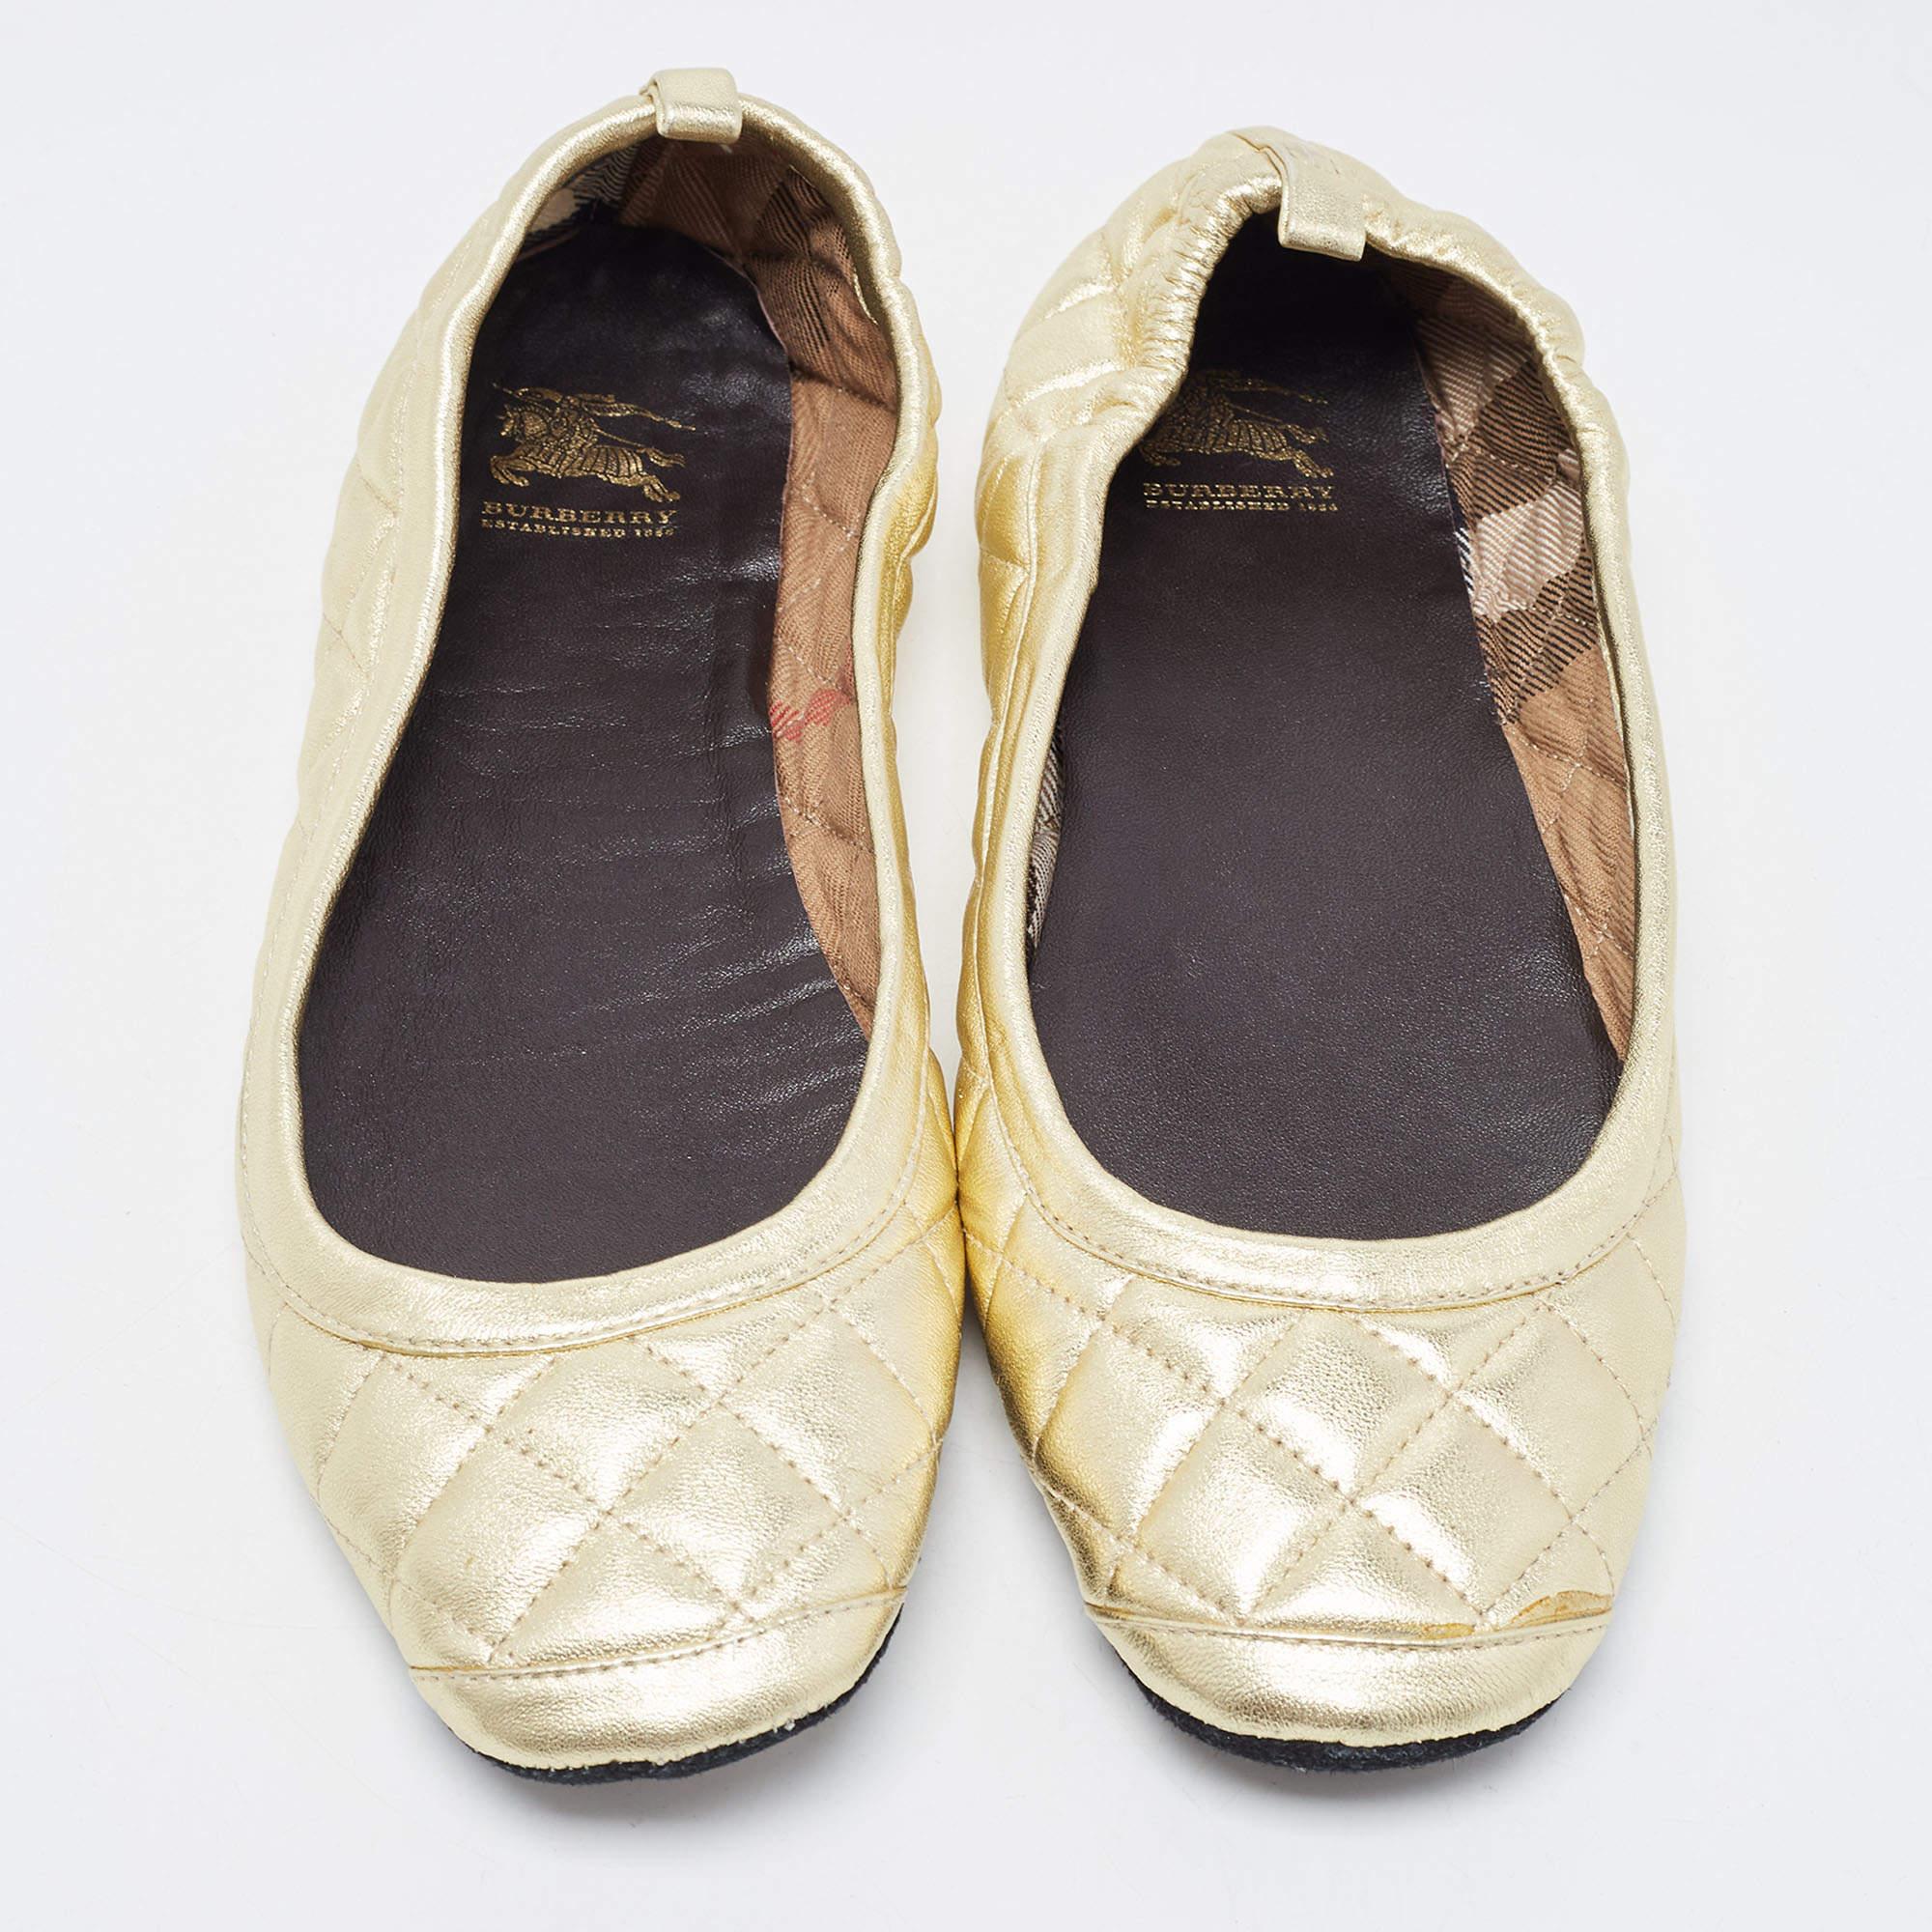 Complete your look by adding these Burberry ballet flats to your collection of everyday footwear. They are crafted skilfully to grant the perfect fit and style.

Includes
Original Pouch, The Luxury Closet Packaging